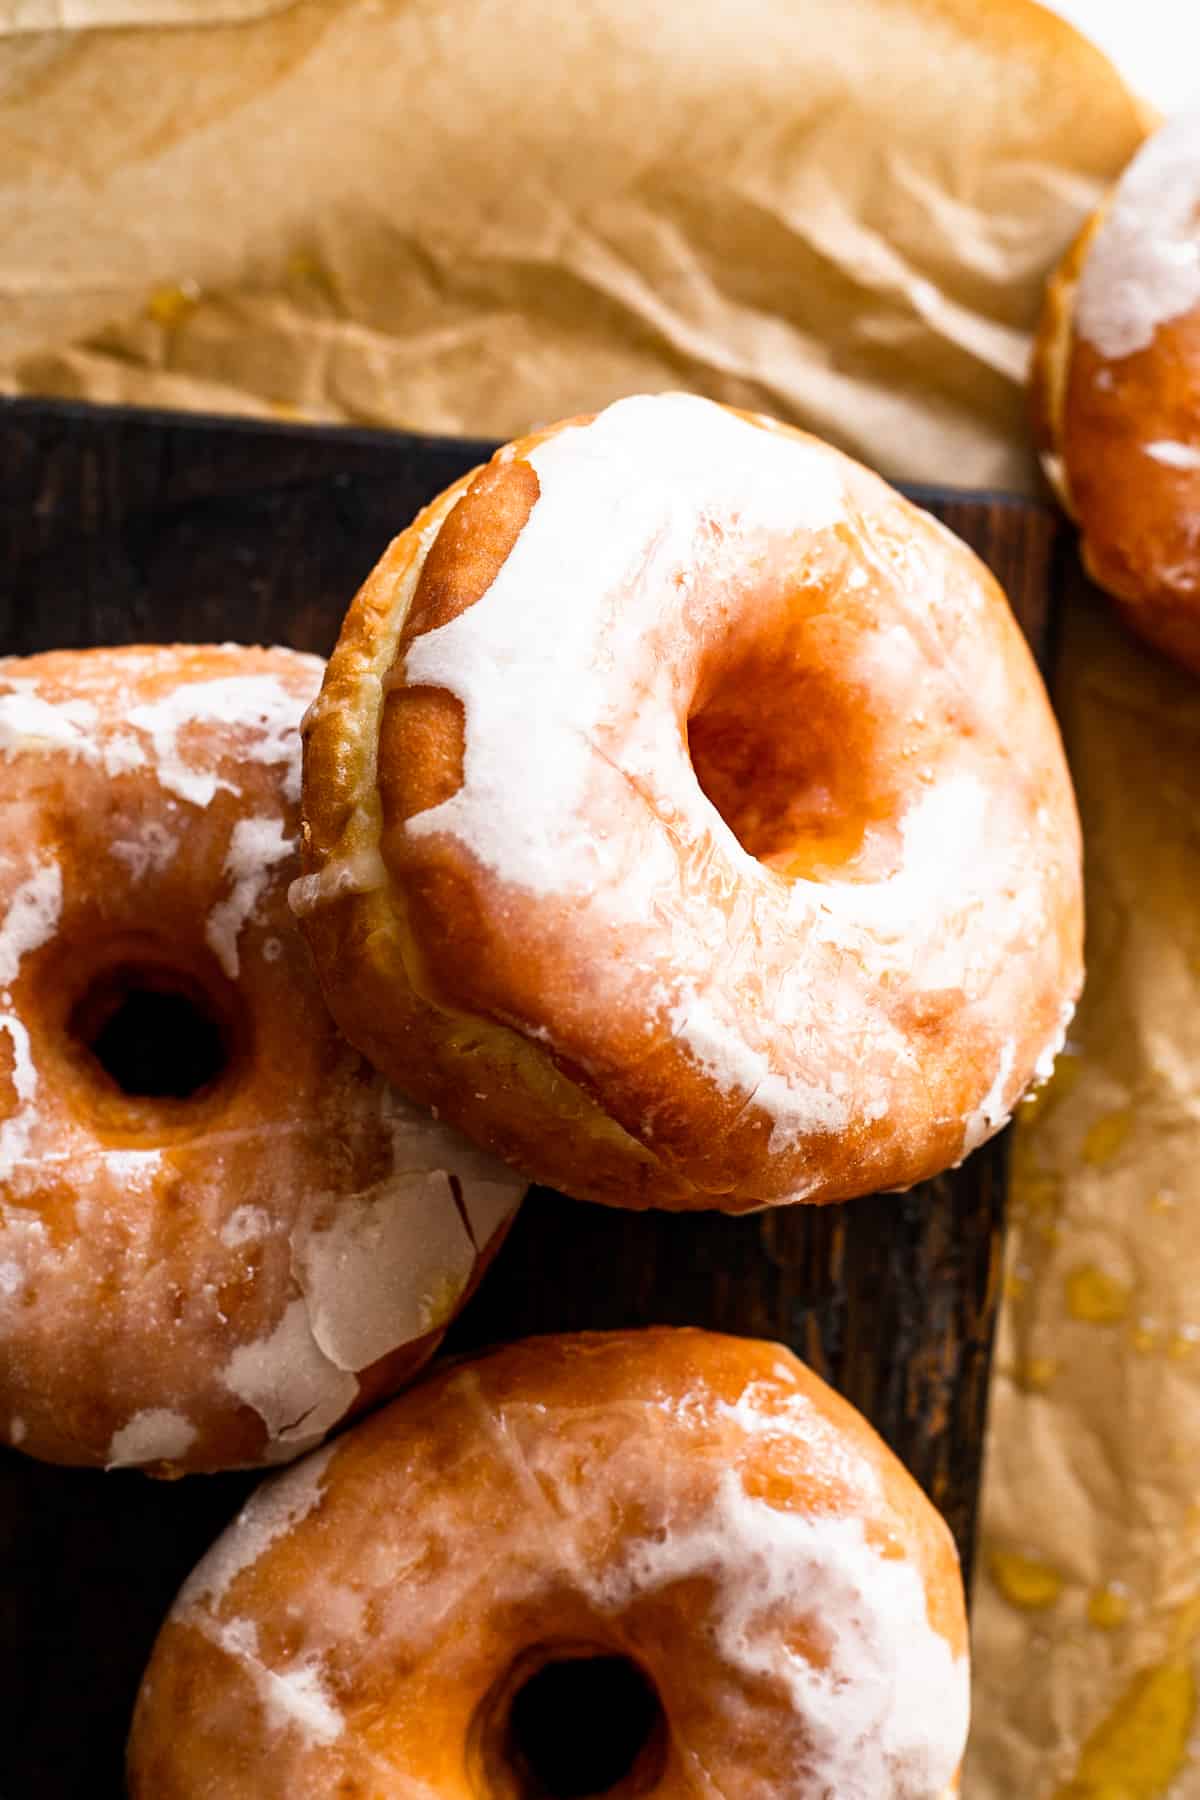 apple cider maple glazed doughnuts resting on a wooden board.